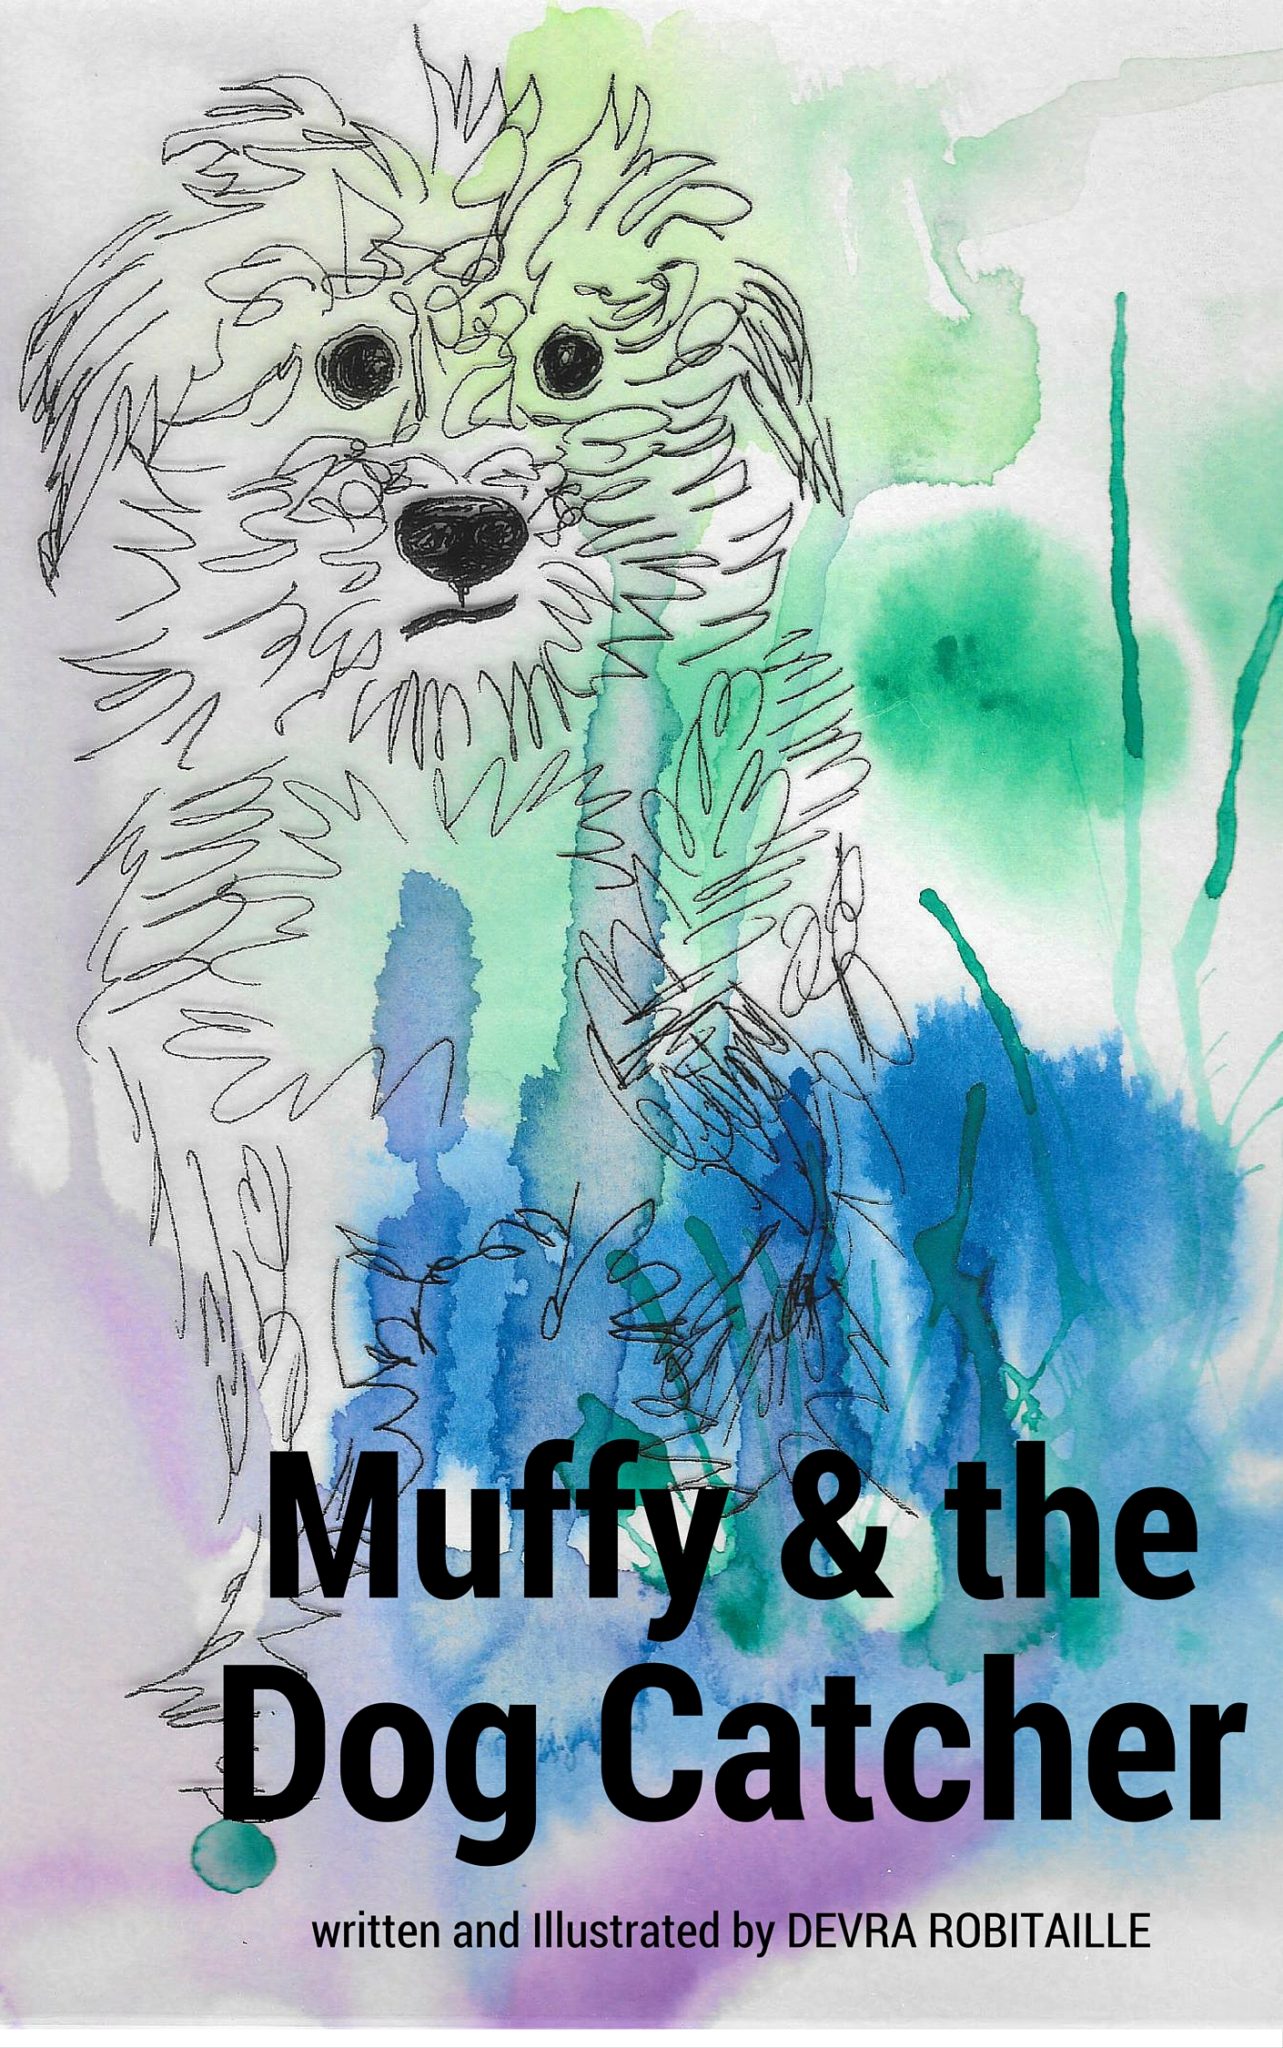 FREE: Muffy and the Dog Catcher by Devra Robitaille